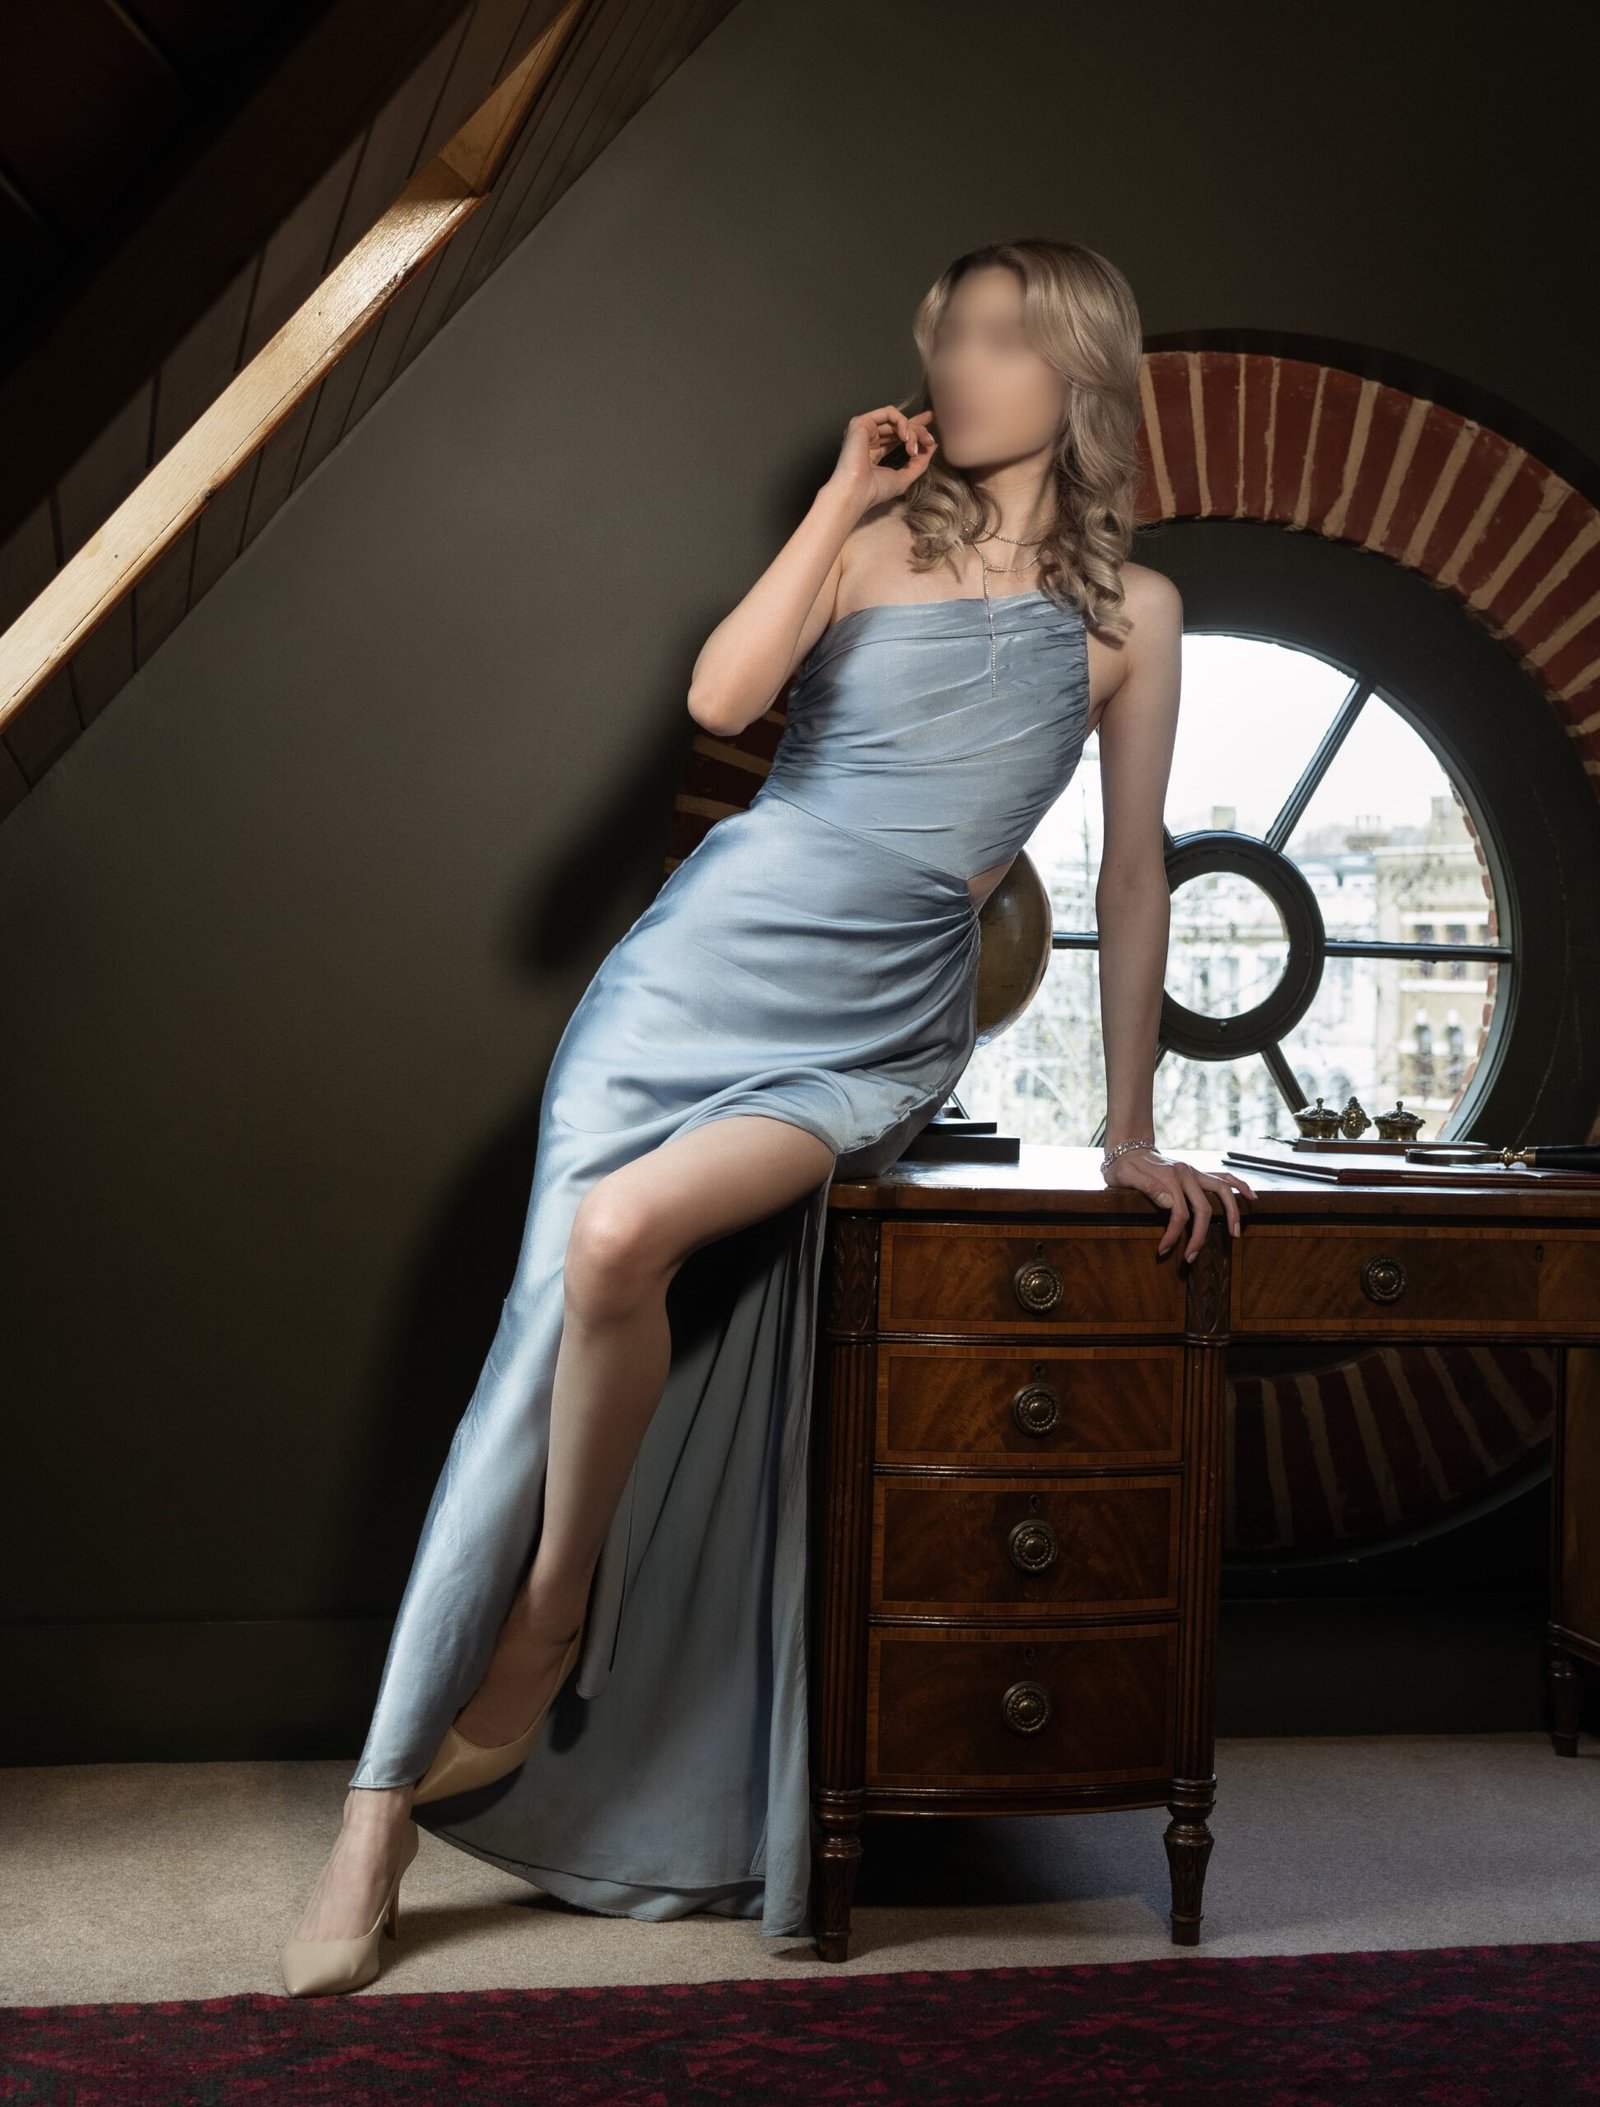 A blonde woman sits elegantly at an antique desk, their posture relaxed and contemplative. They are wearing a stylish, one-shoulder, sky-blue gown with a high leg slit, paired with beige heels. The room is characterized by its classic architecture, including a round port-style window that offers a glimpse of the urban landscape outside, melding historical charm with a touch of contemporary fashion.